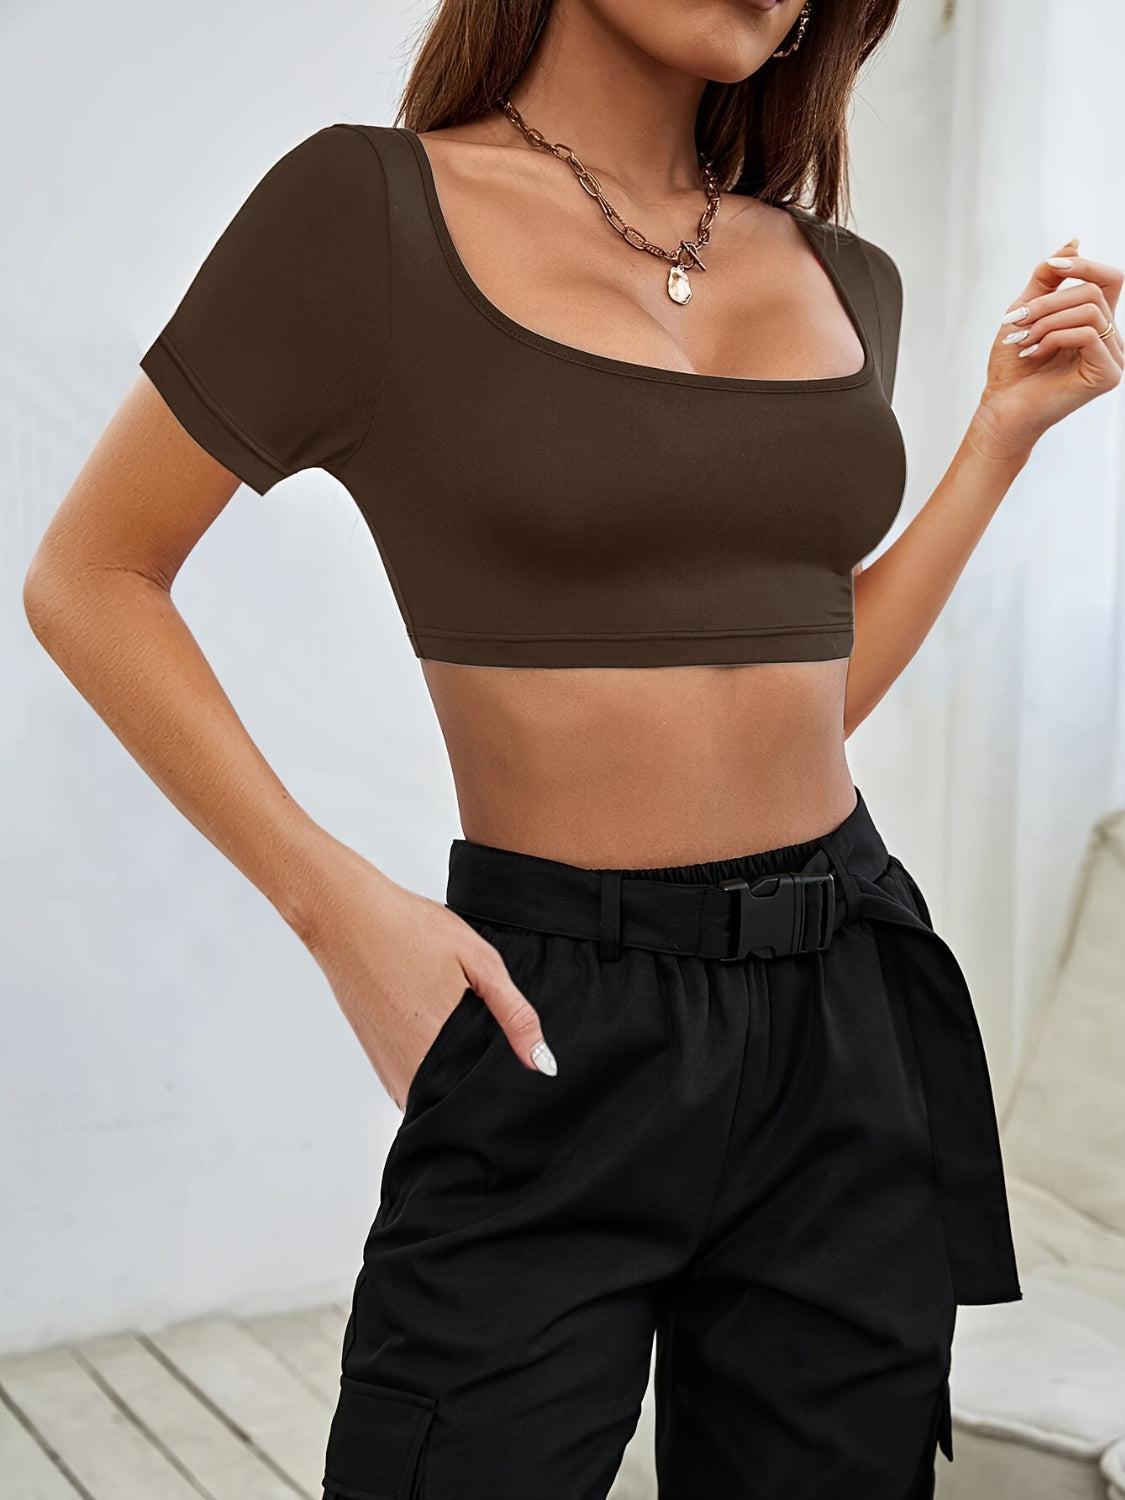 a woman in a crop top poses for a picture